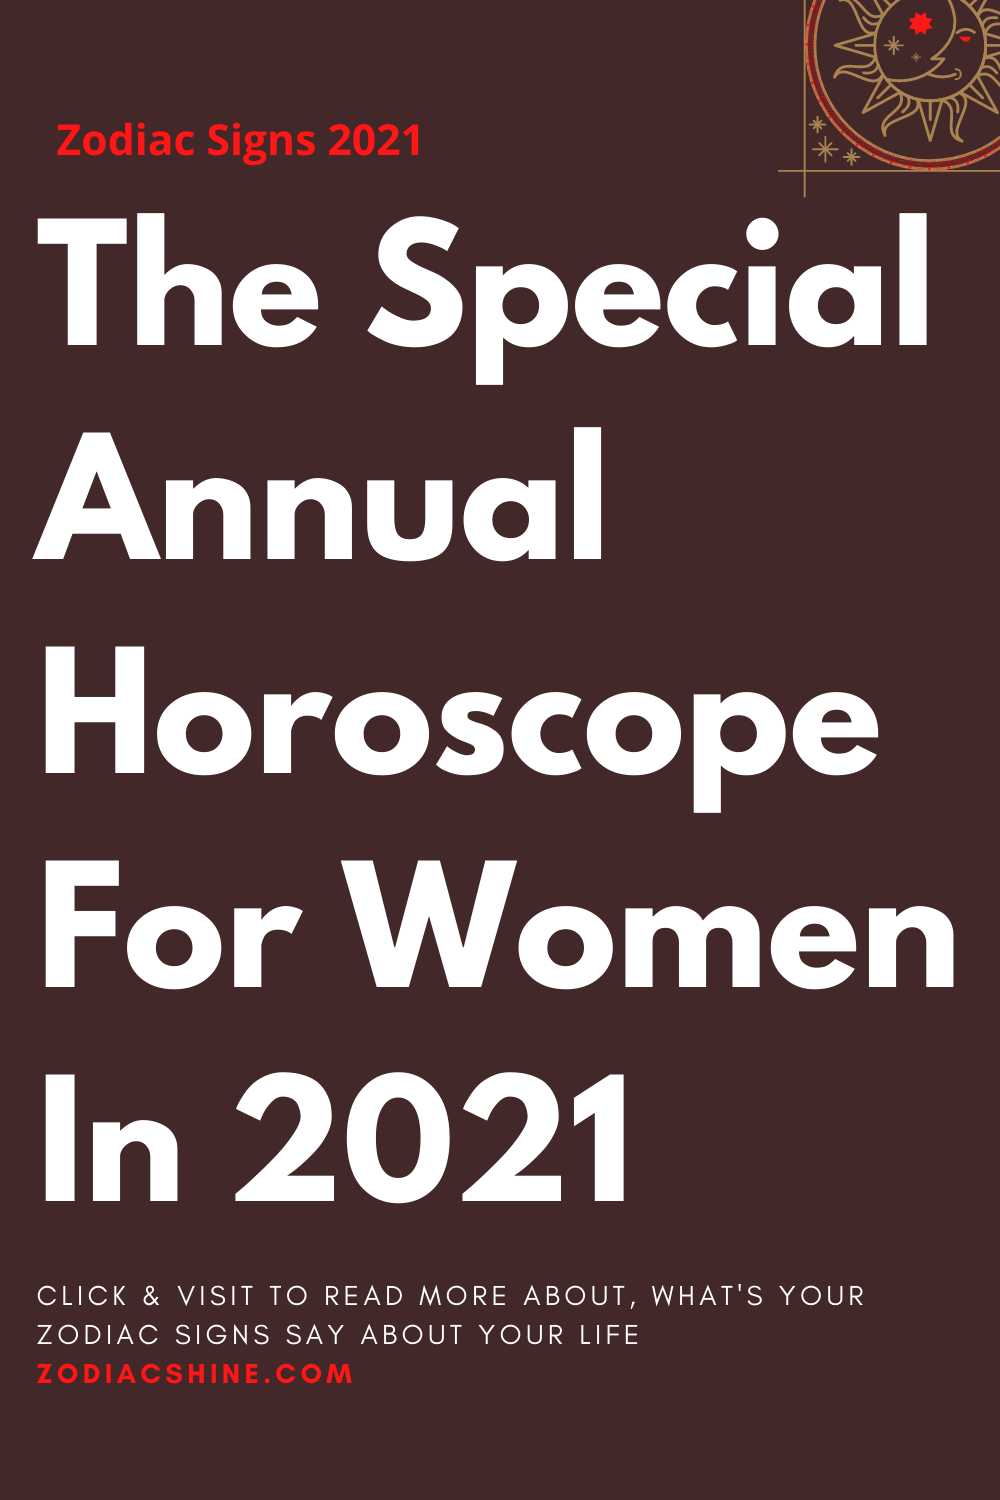 The Special Annual Horoscope For Women In 2021